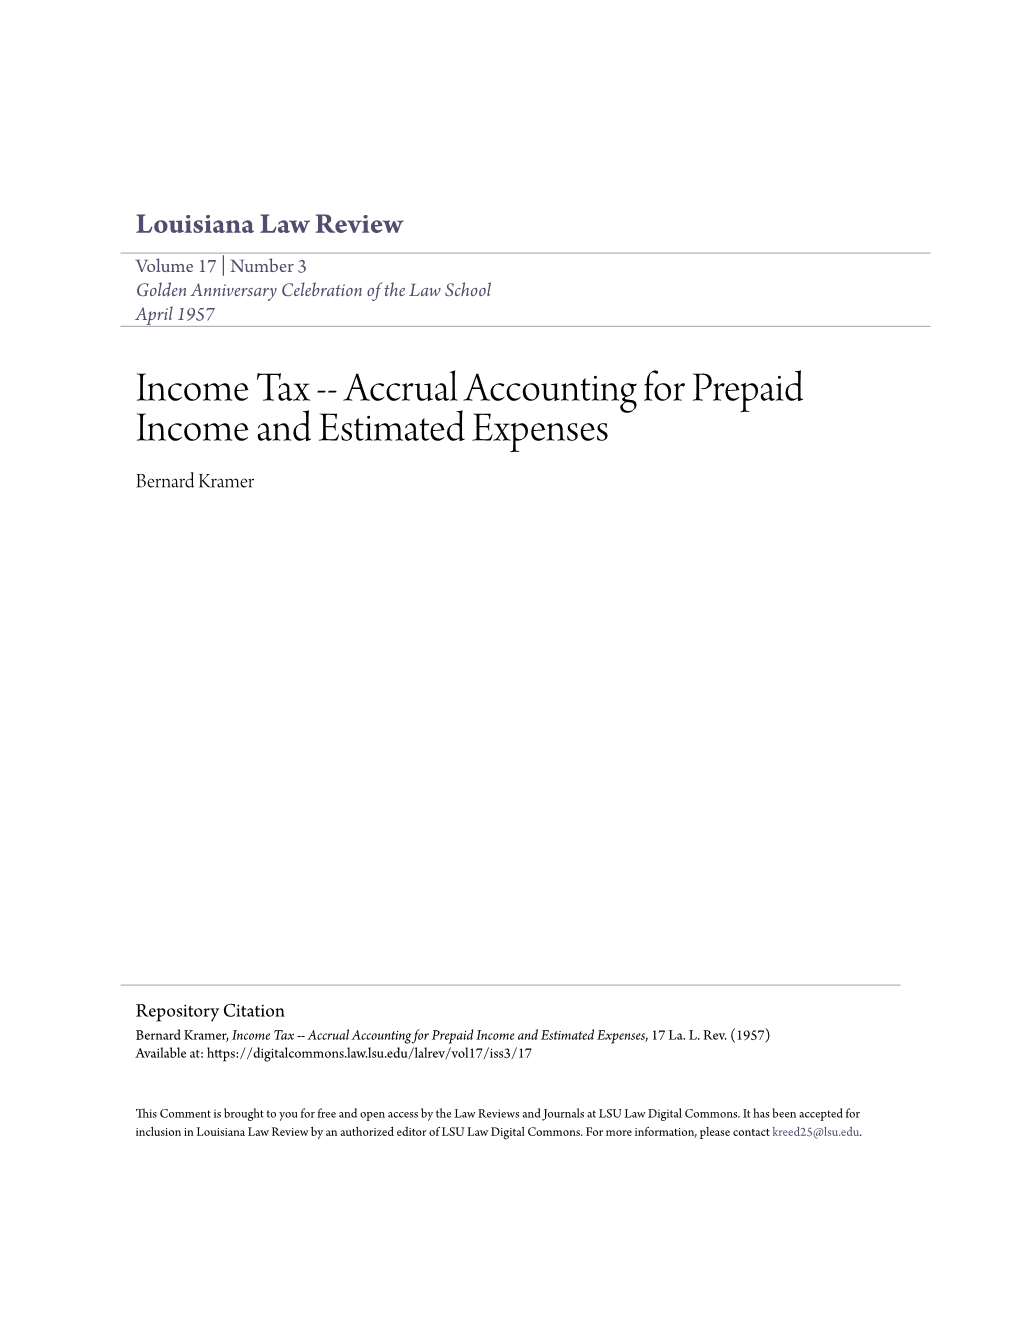 Income Tax -- Accrual Accounting for Prepaid Income and Estimated Expenses Bernard Kramer